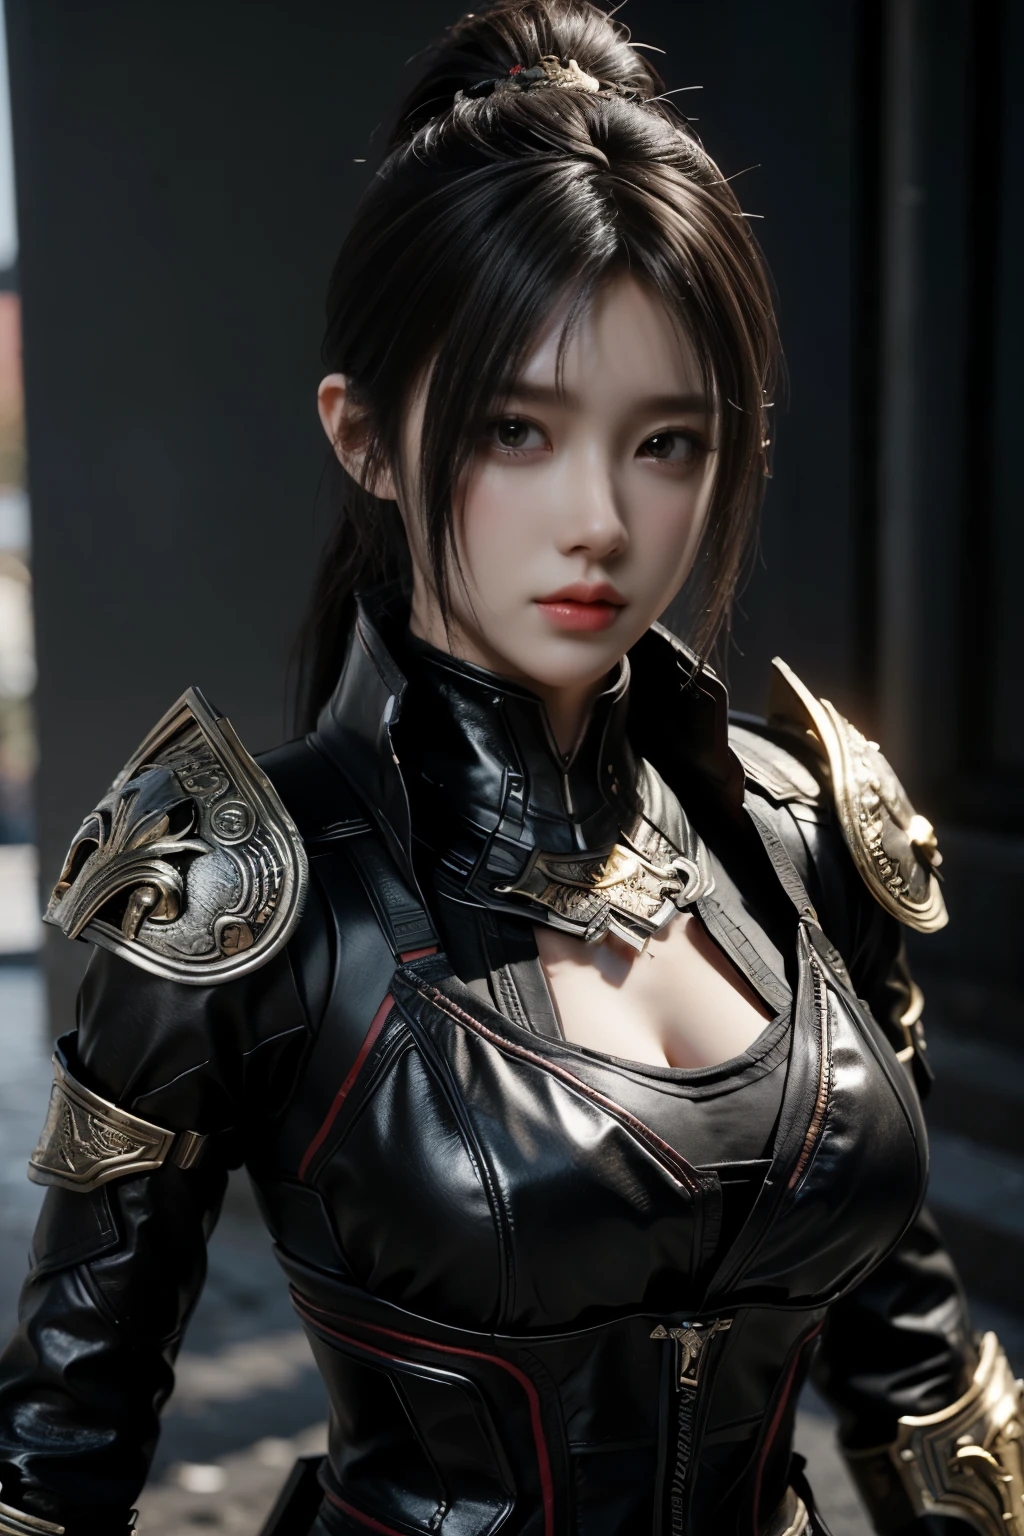 Game art，The best picture quality，Highest resolution，8K，(Portrait:1.5)，(Head close-up)，(Rule of thirds)，Unreal Engine 5 rendering works， (The Girl of the Future)，(Female Warrior)， 
20-year-old girl，An eye rich in detail，(Big breasts)，Elegant and noble，indifferent，brave，
(Future style combat suit combining the characteristics of ancient armor，Ancient runes of light，Combat accessories with rich detailetallic luster)，Future police，cyberpunk characters，

photo poses，simple background，Movie lights，Ray tracing，Game CG，((3D Unreal Engine))，OC rendering reflection pattern